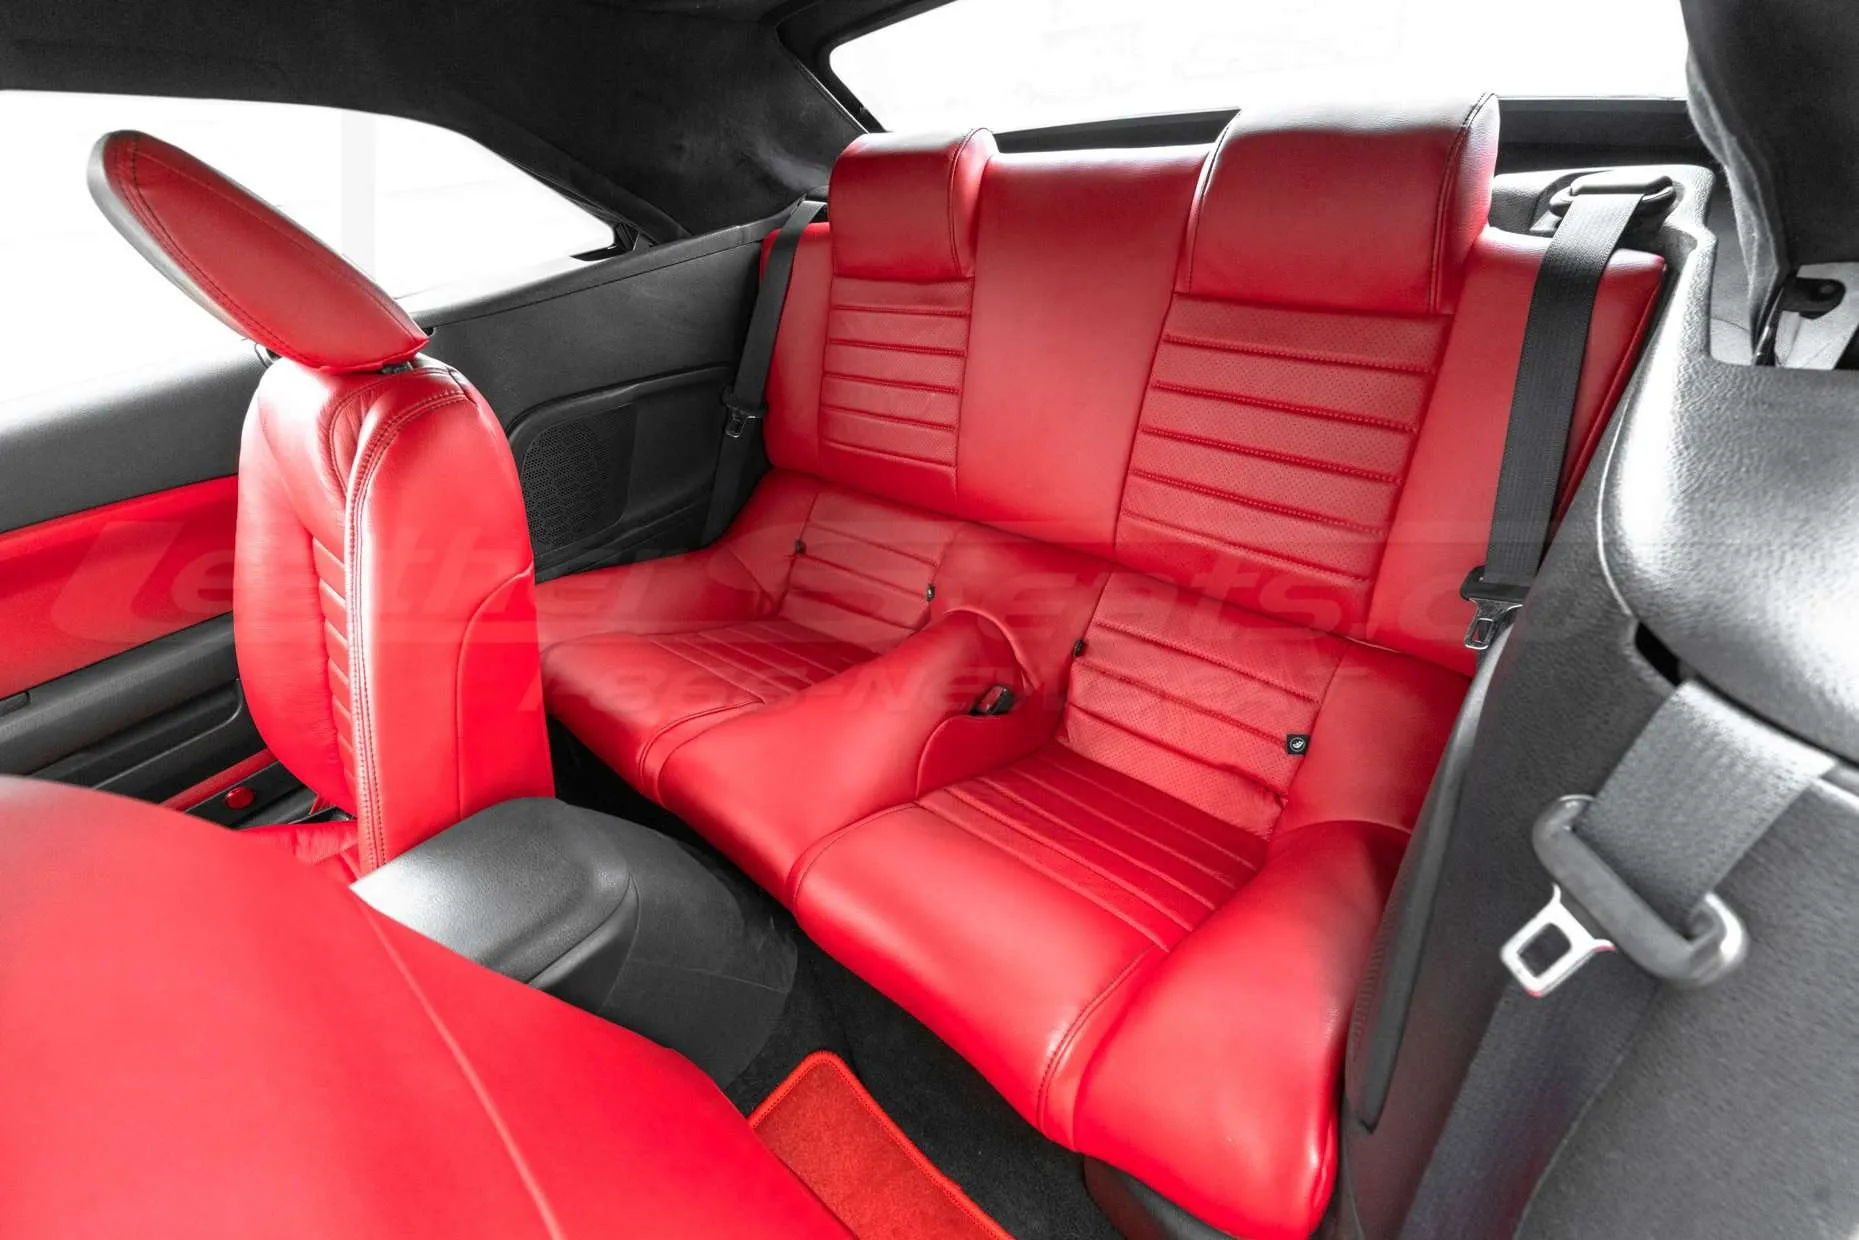 2005-2009 Ford Mustang with installed Bright Red leather seats